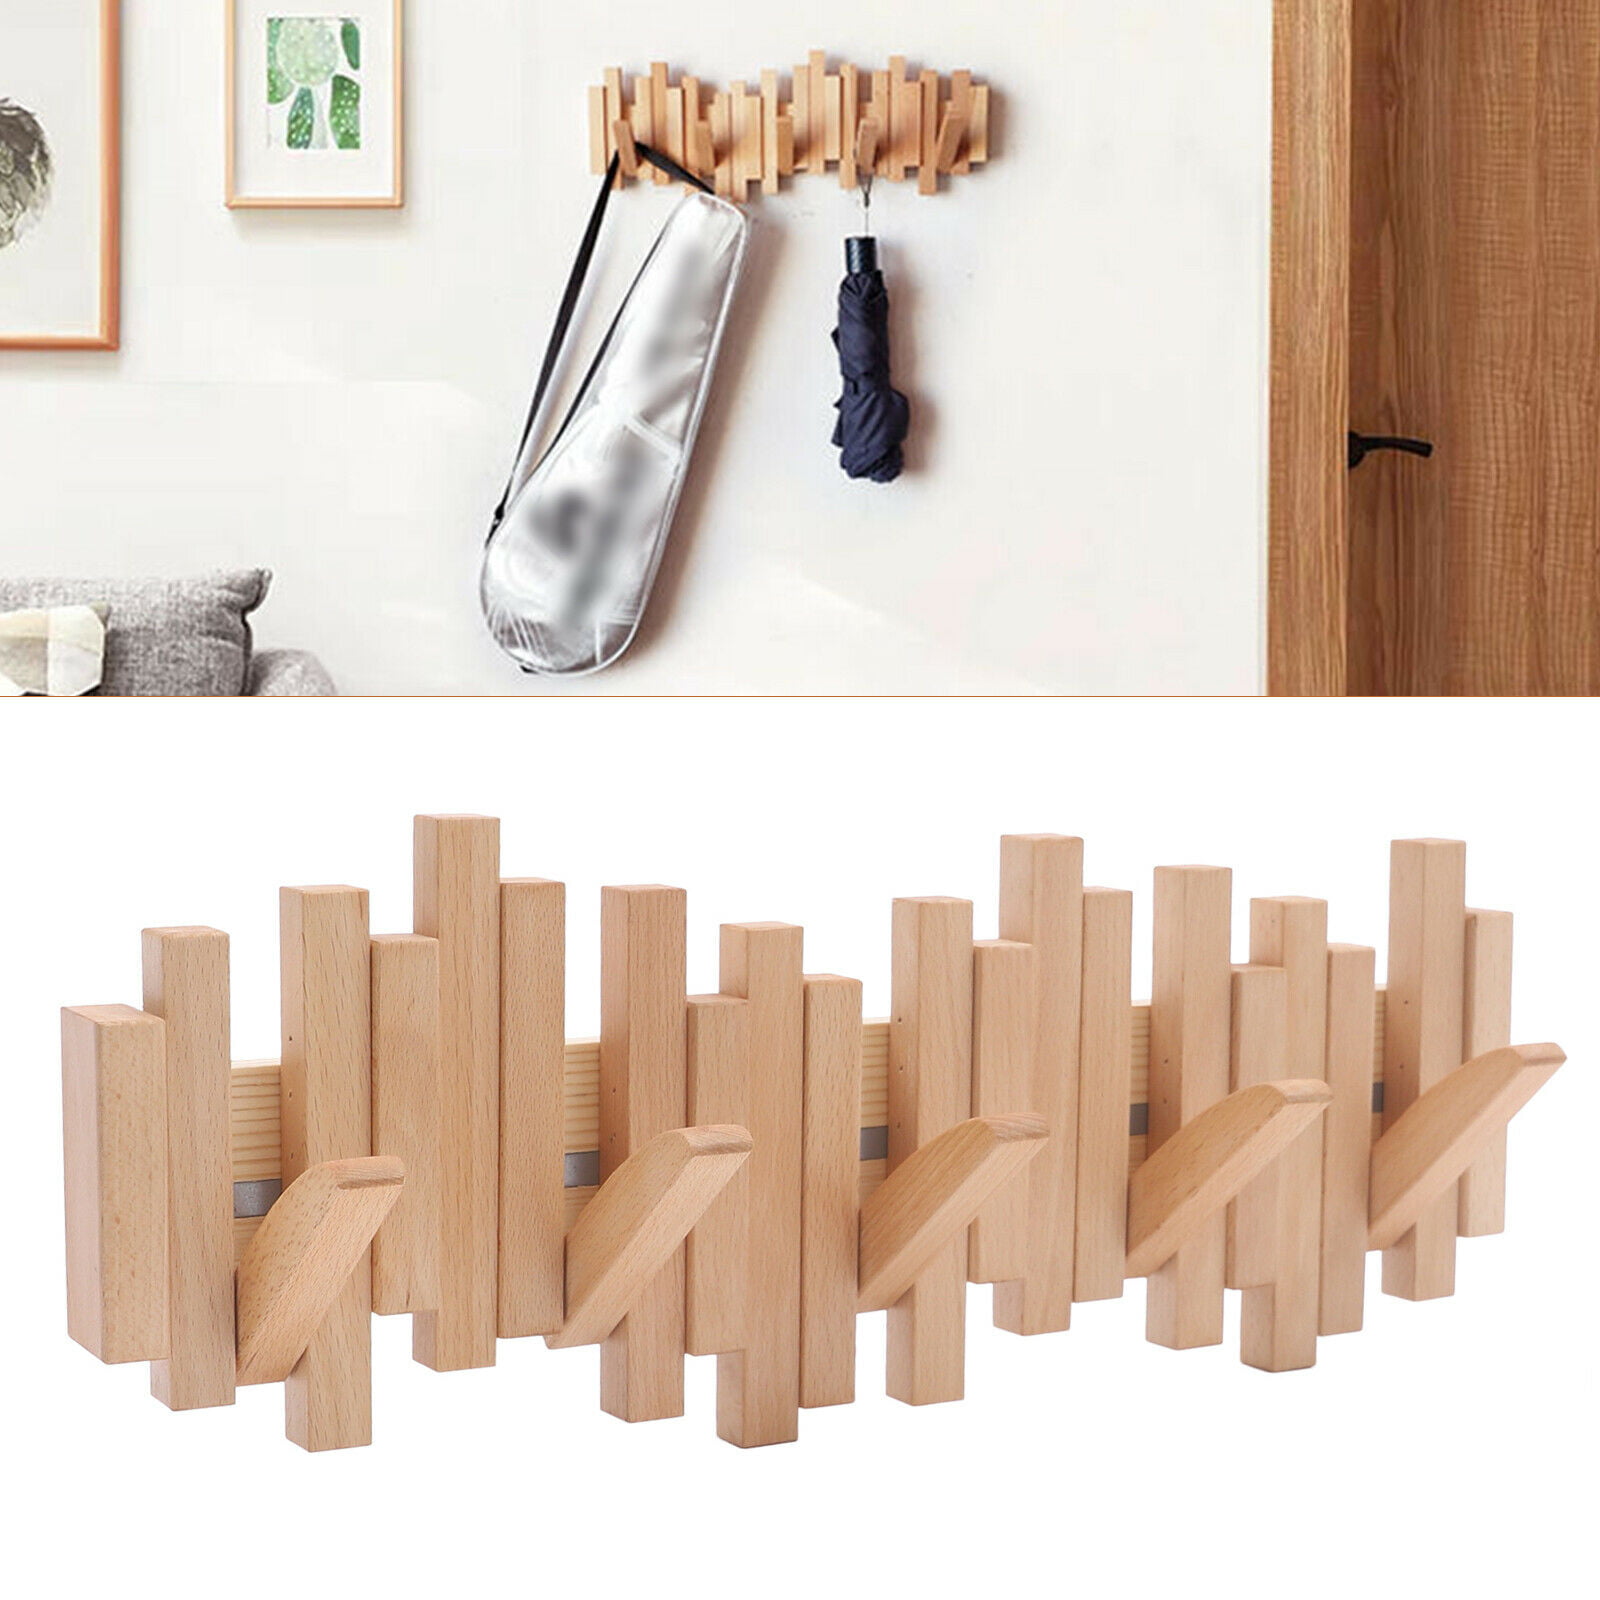 OUKANING Solid Wood Coat Rack 5 Hooks Wall Mounted Coat Rack Suitable for  Coats Bags Hats Umbrellas